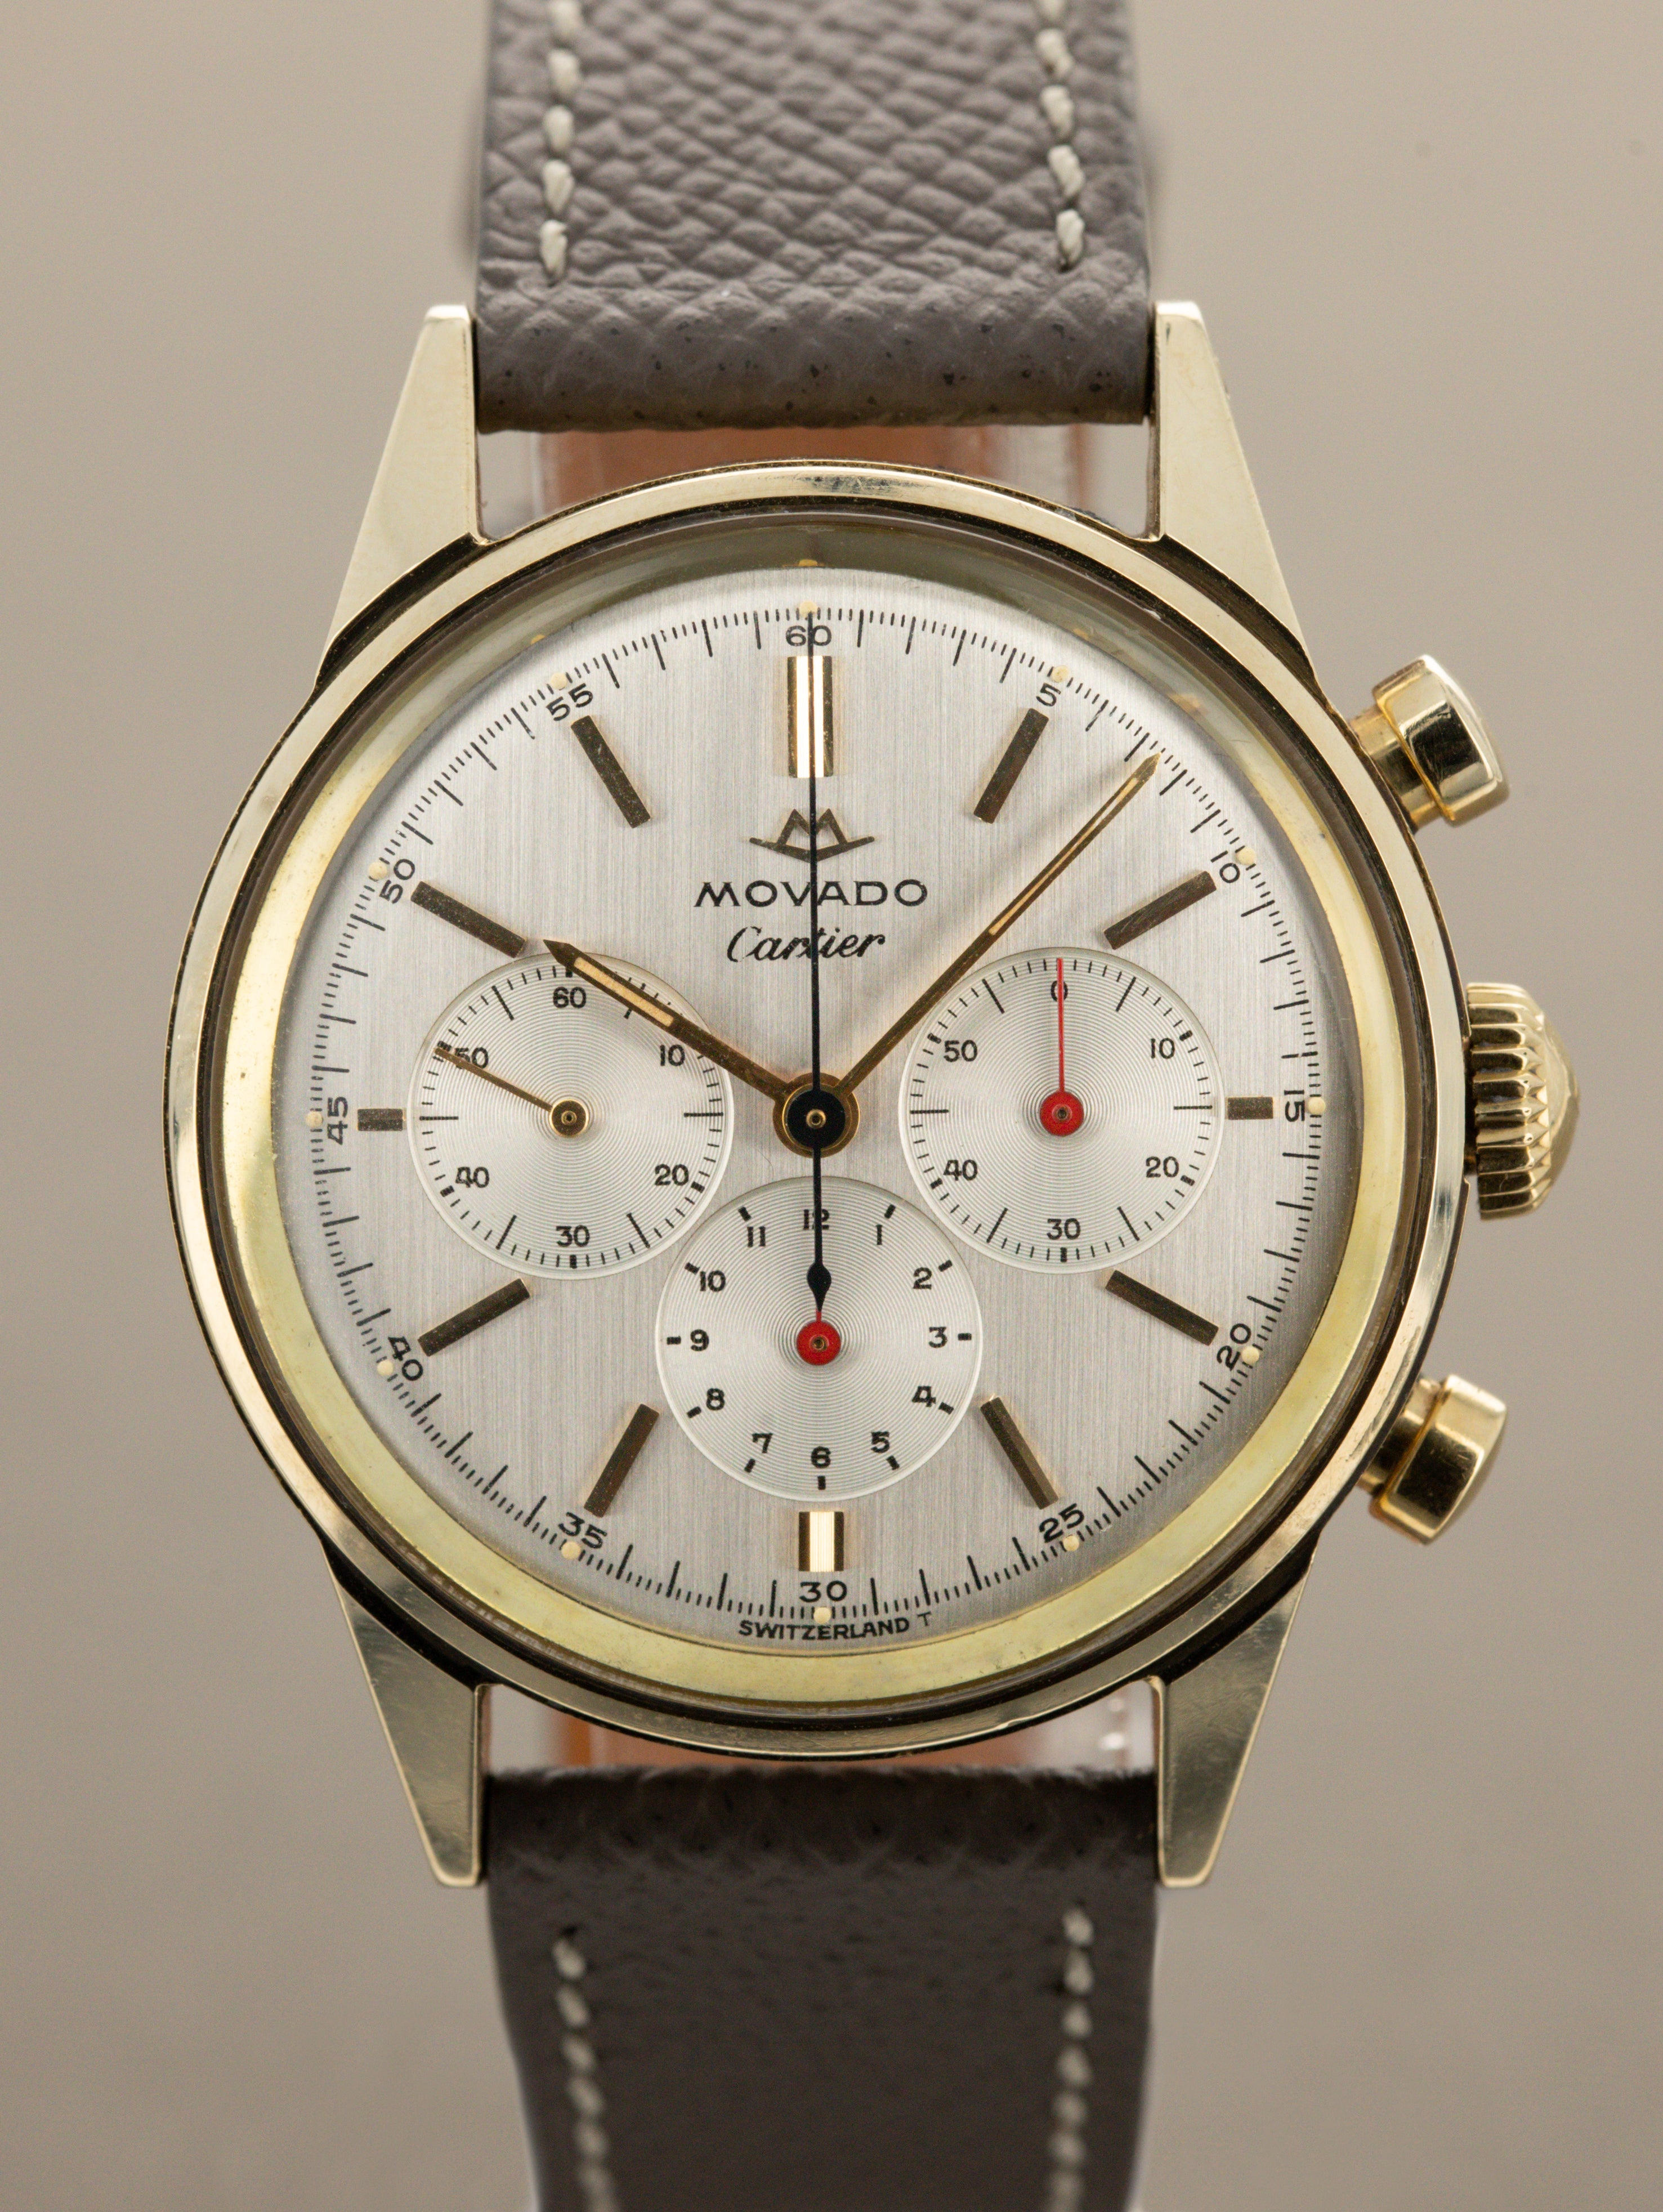 Movado M95 Chronograph - Retailed by Cartier